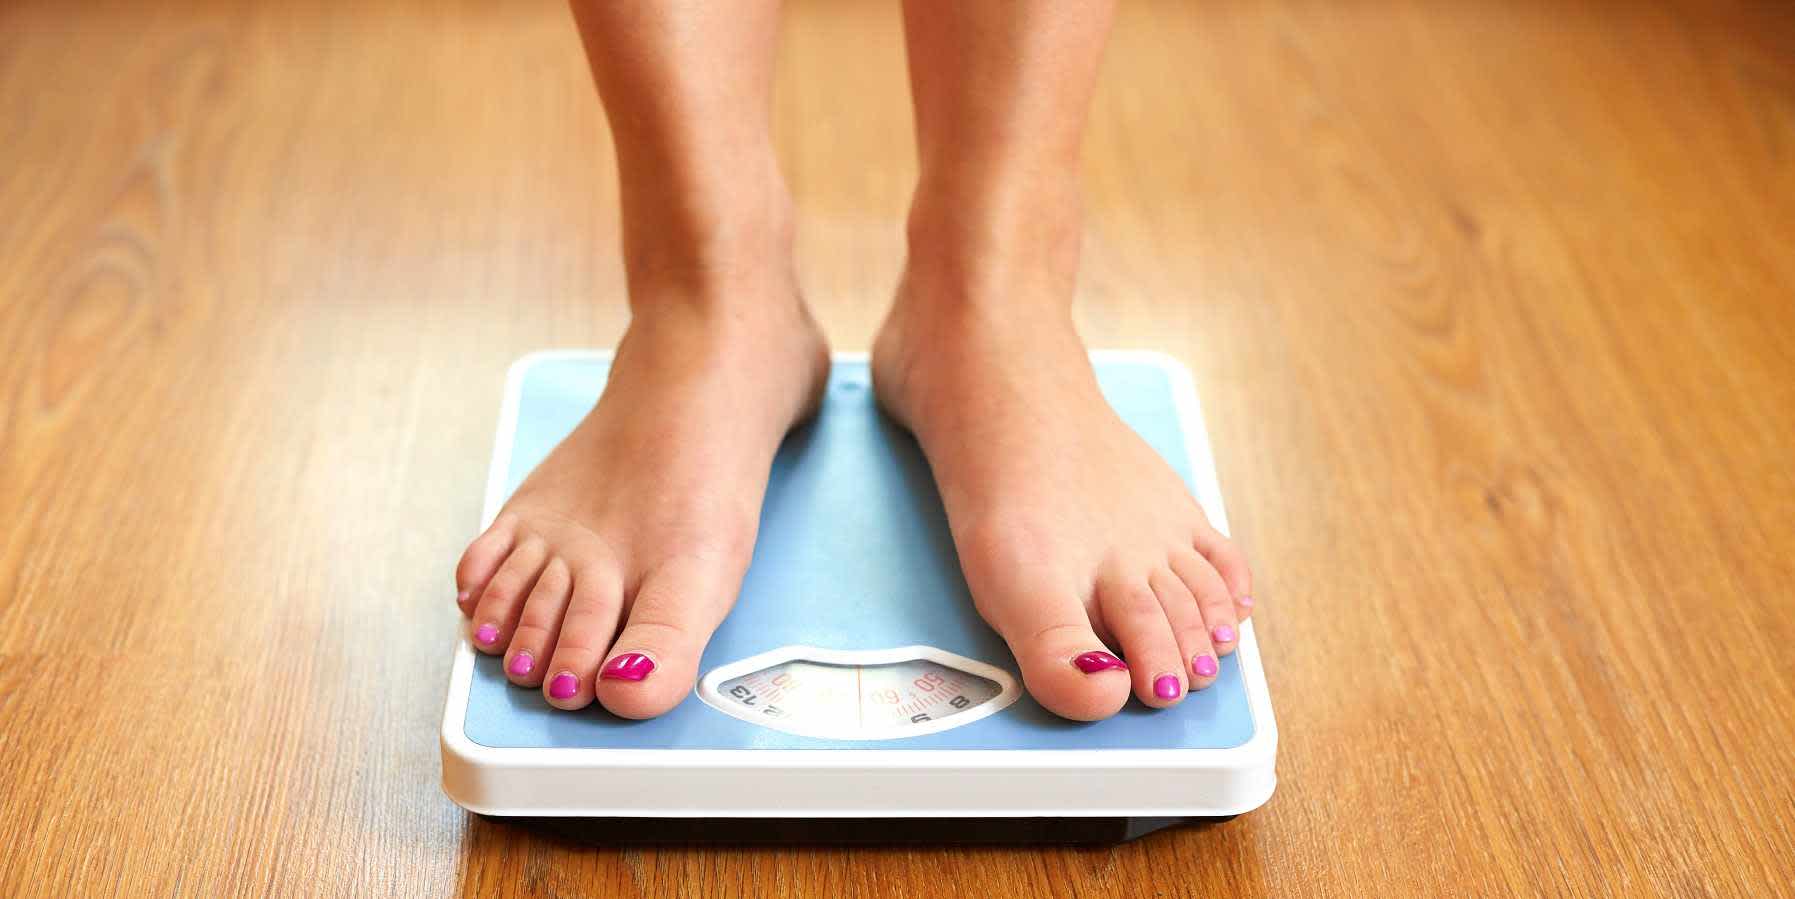 Person standing on bathroom scale after implementing lifestyle changes to lose weight